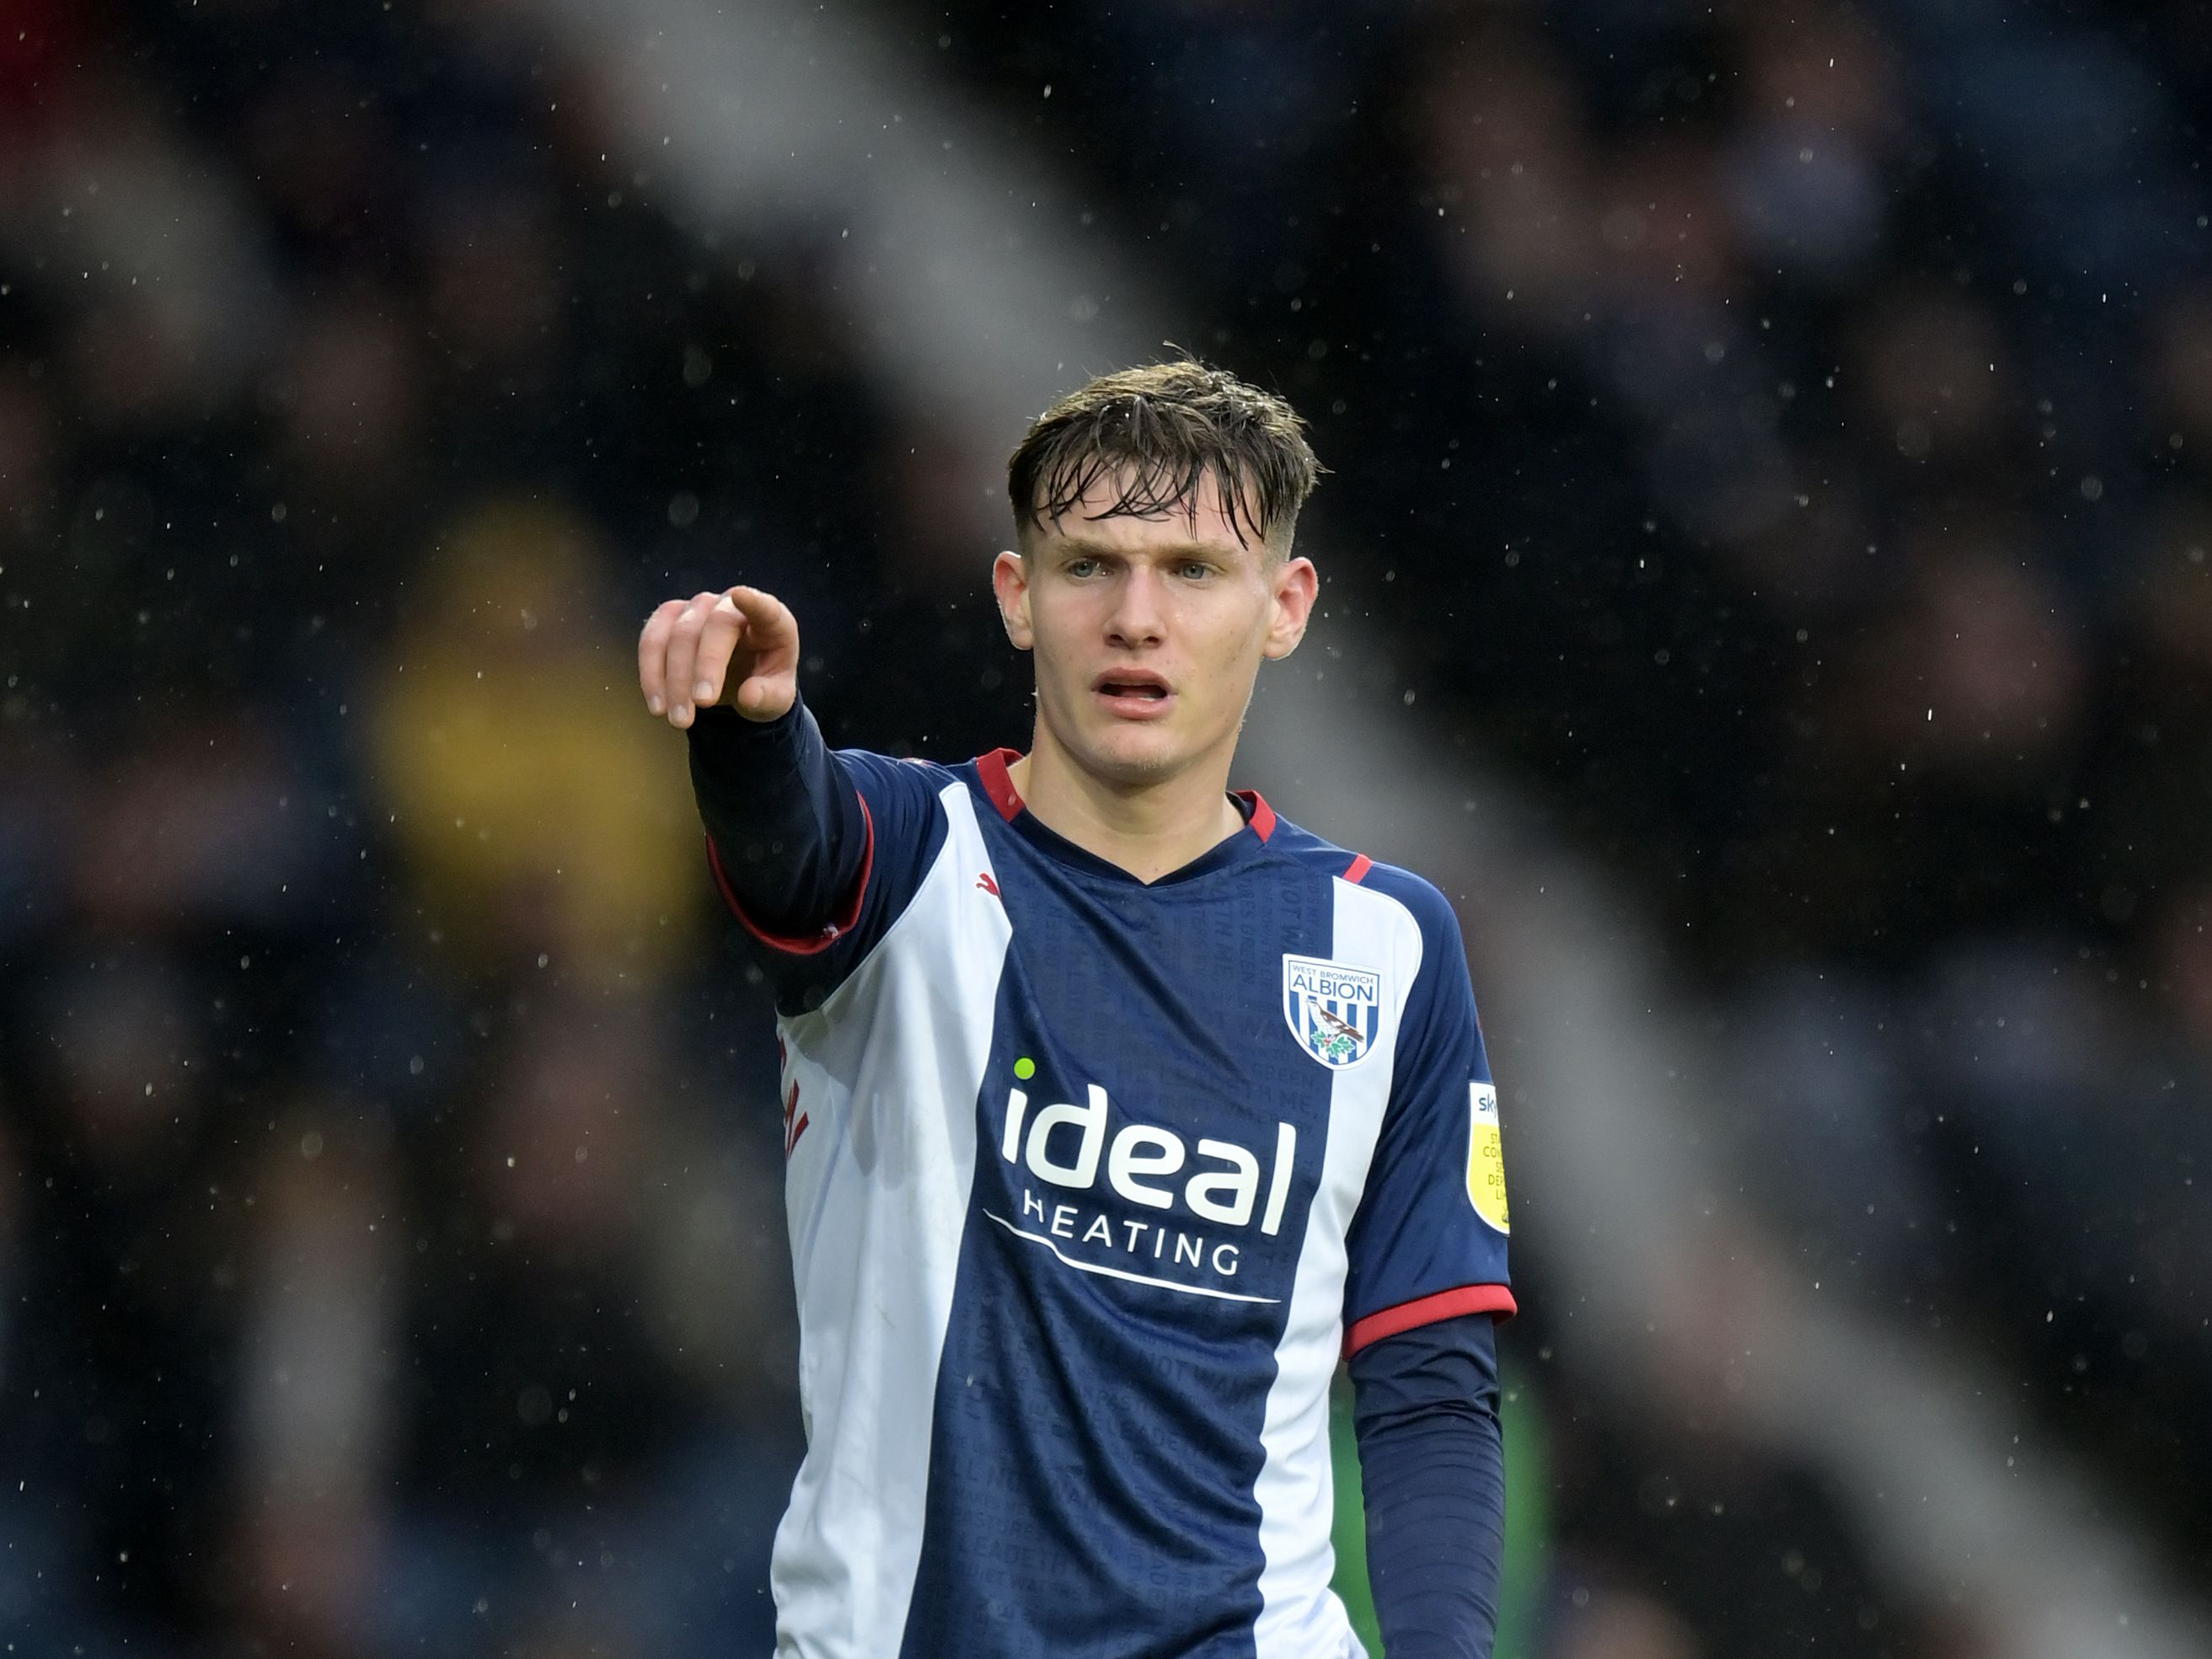 Gardner-Hickman receives maiden Young Lions call-up | West Bromwich Albion